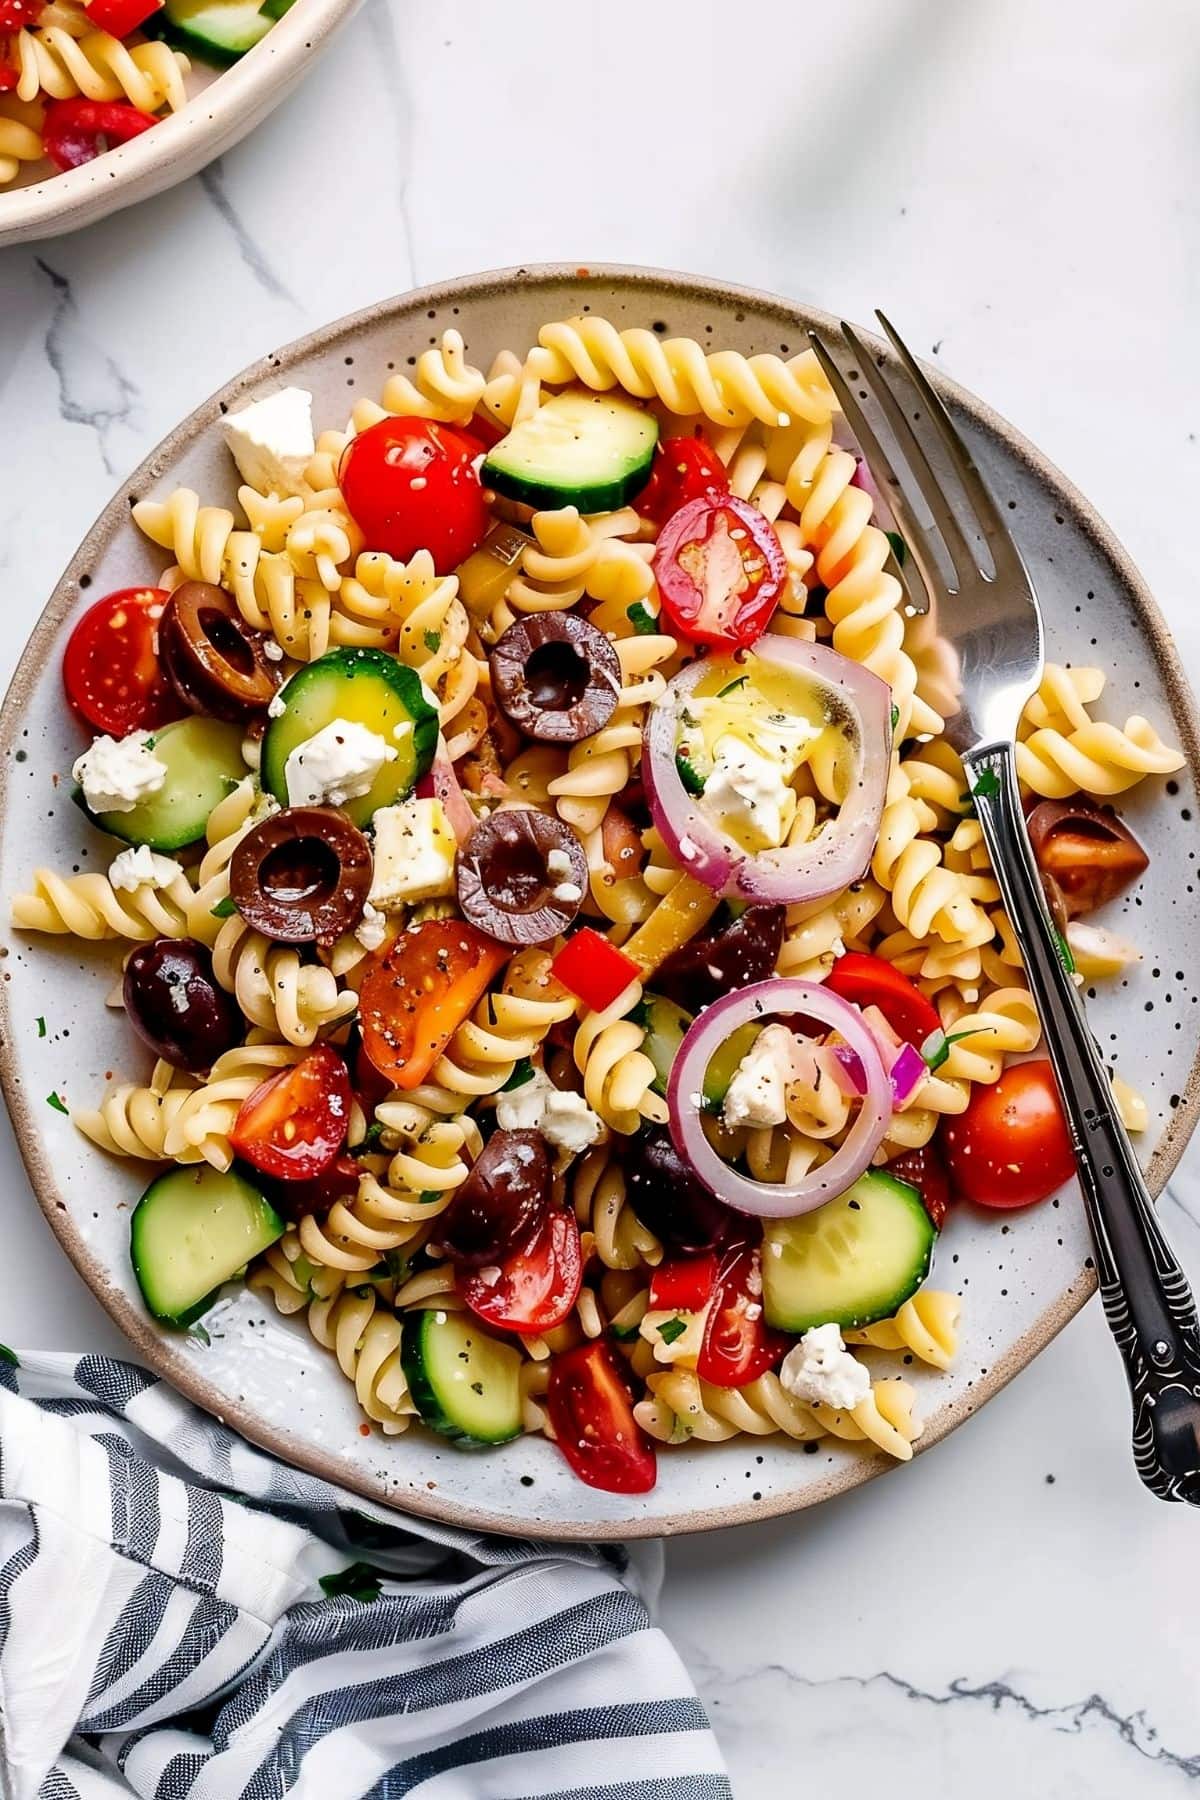 Greek Pasta Salad with Rotini, Black Olives, Red Onion, Cucumber, Tomatoes, and Feta Cheese on a Plate with a Fork